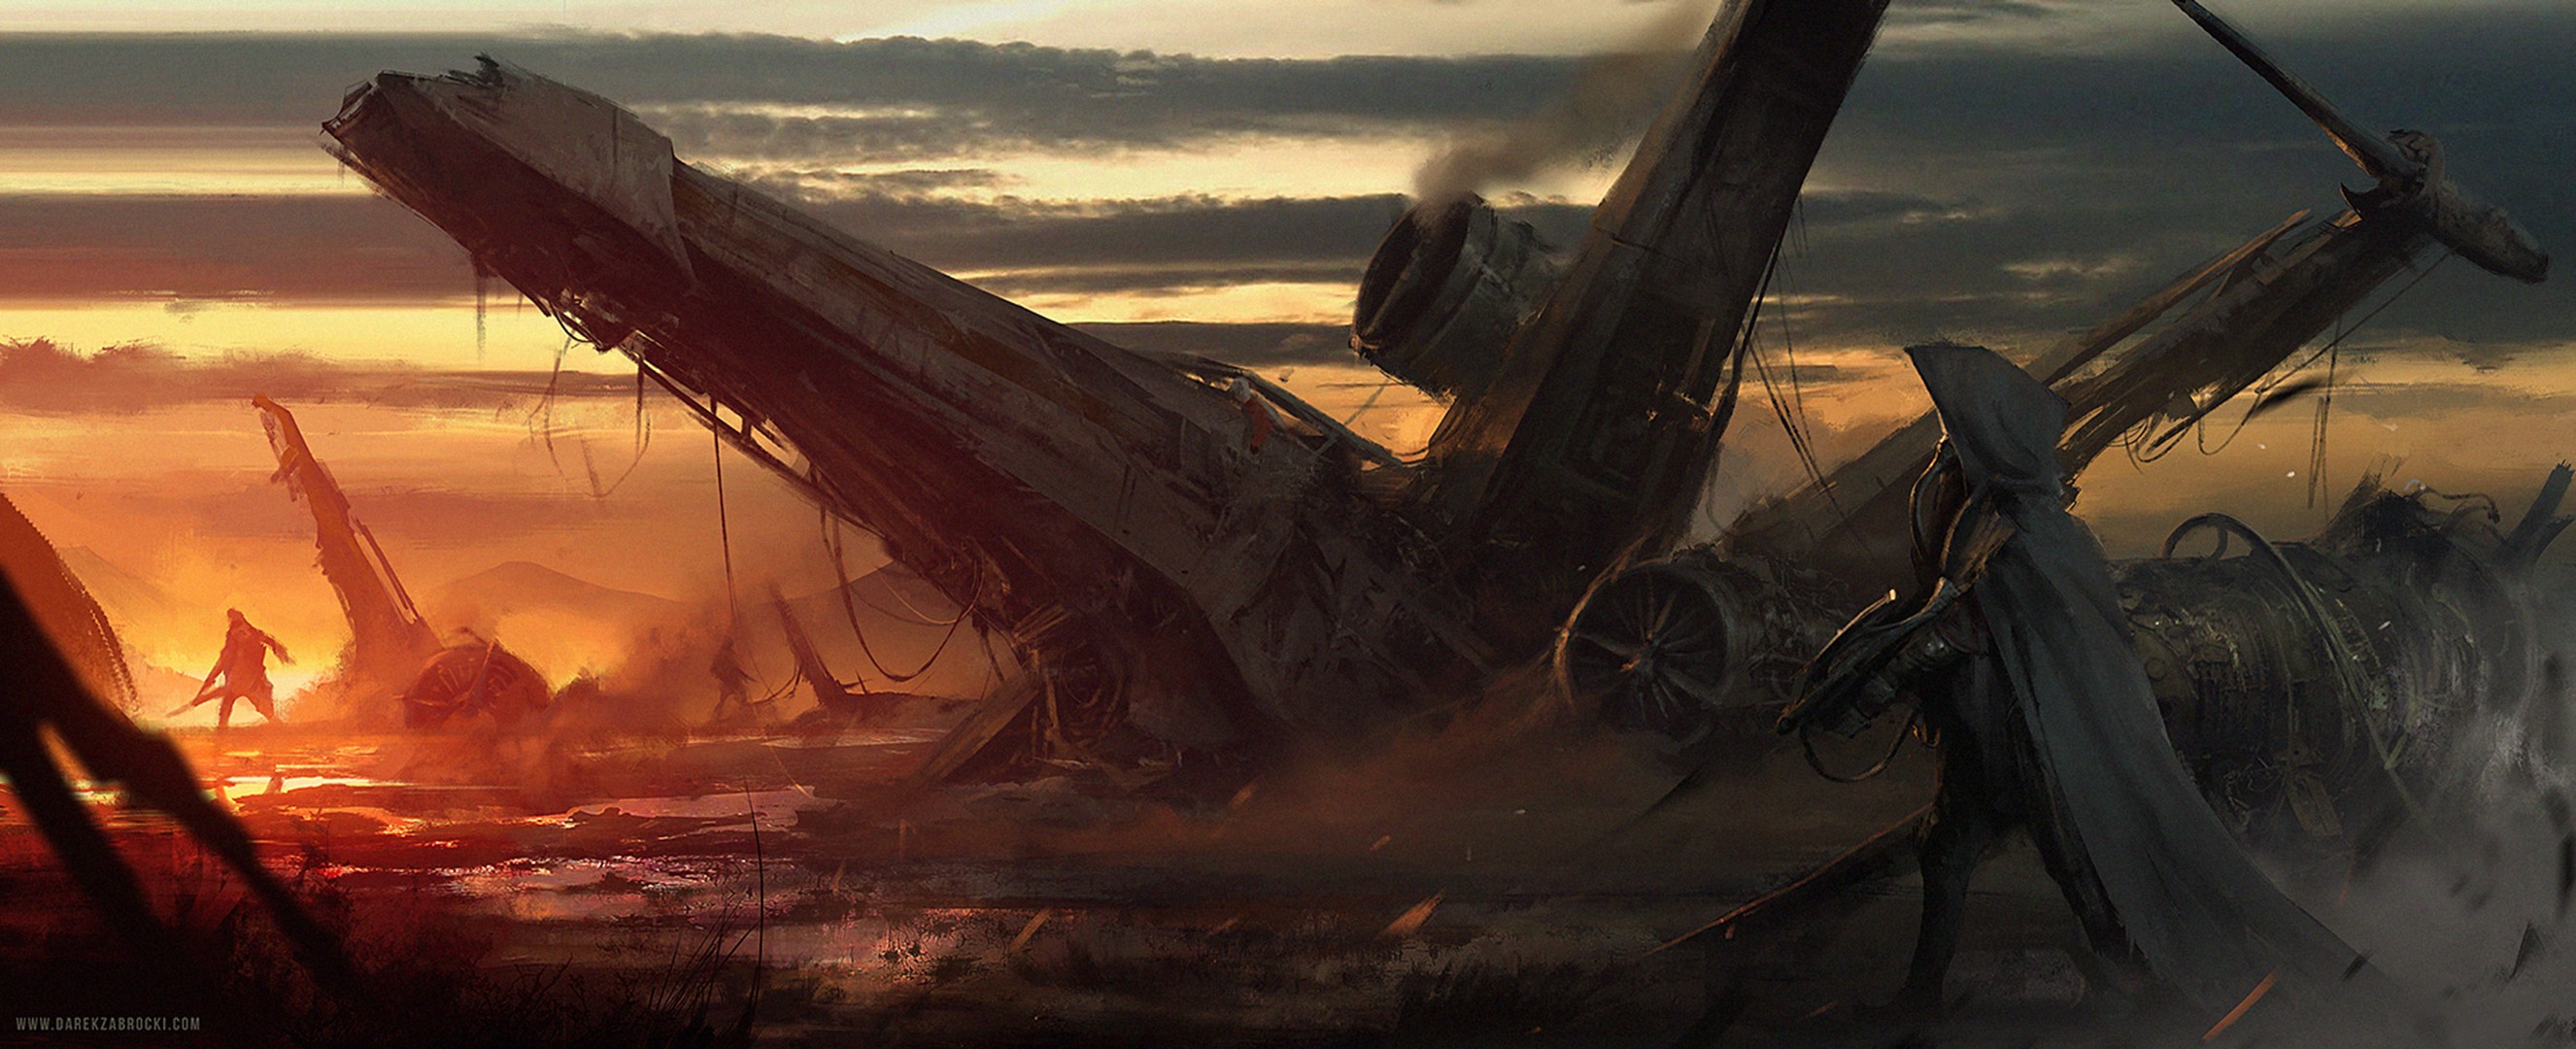 General 2652x1080 Star Wars X-wing wreck vehicle science fiction Star Wars Ships sunlight